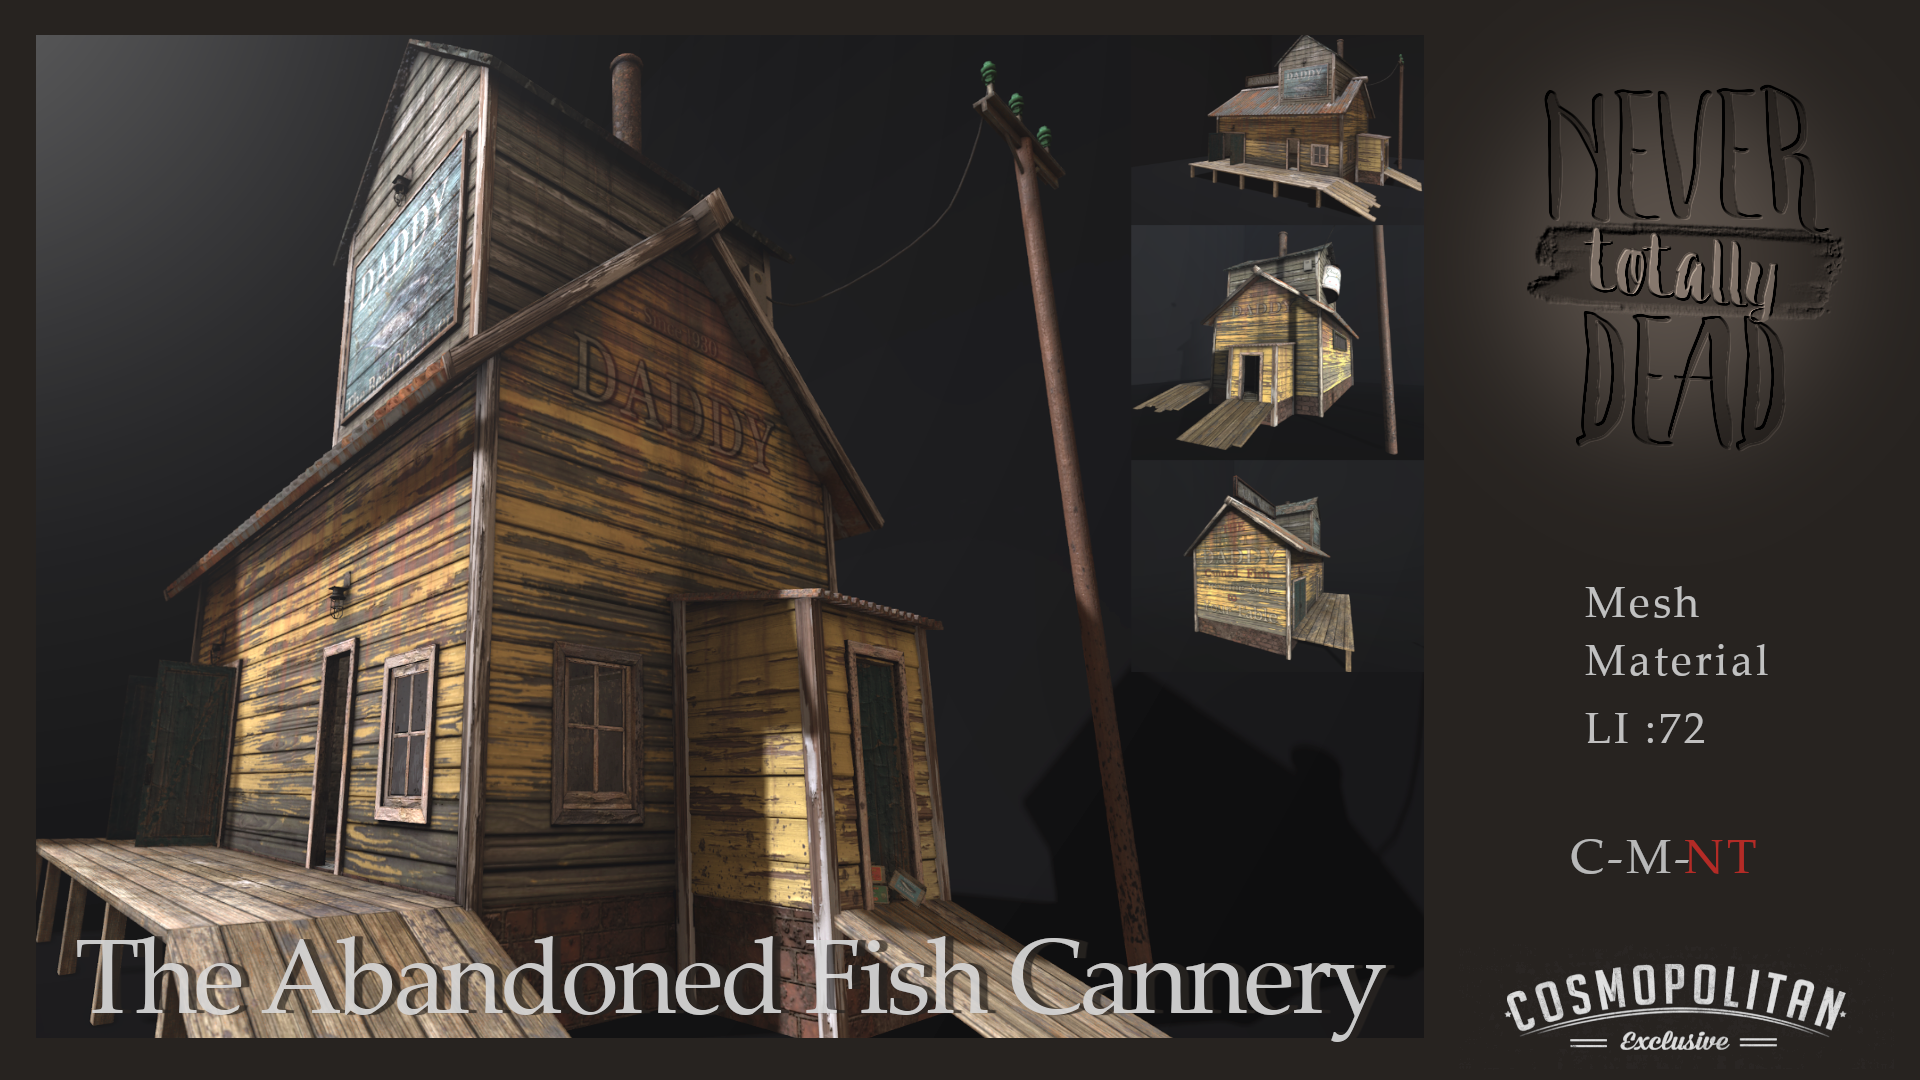 Never Totally Dead – The Abandoned Fish Cannery